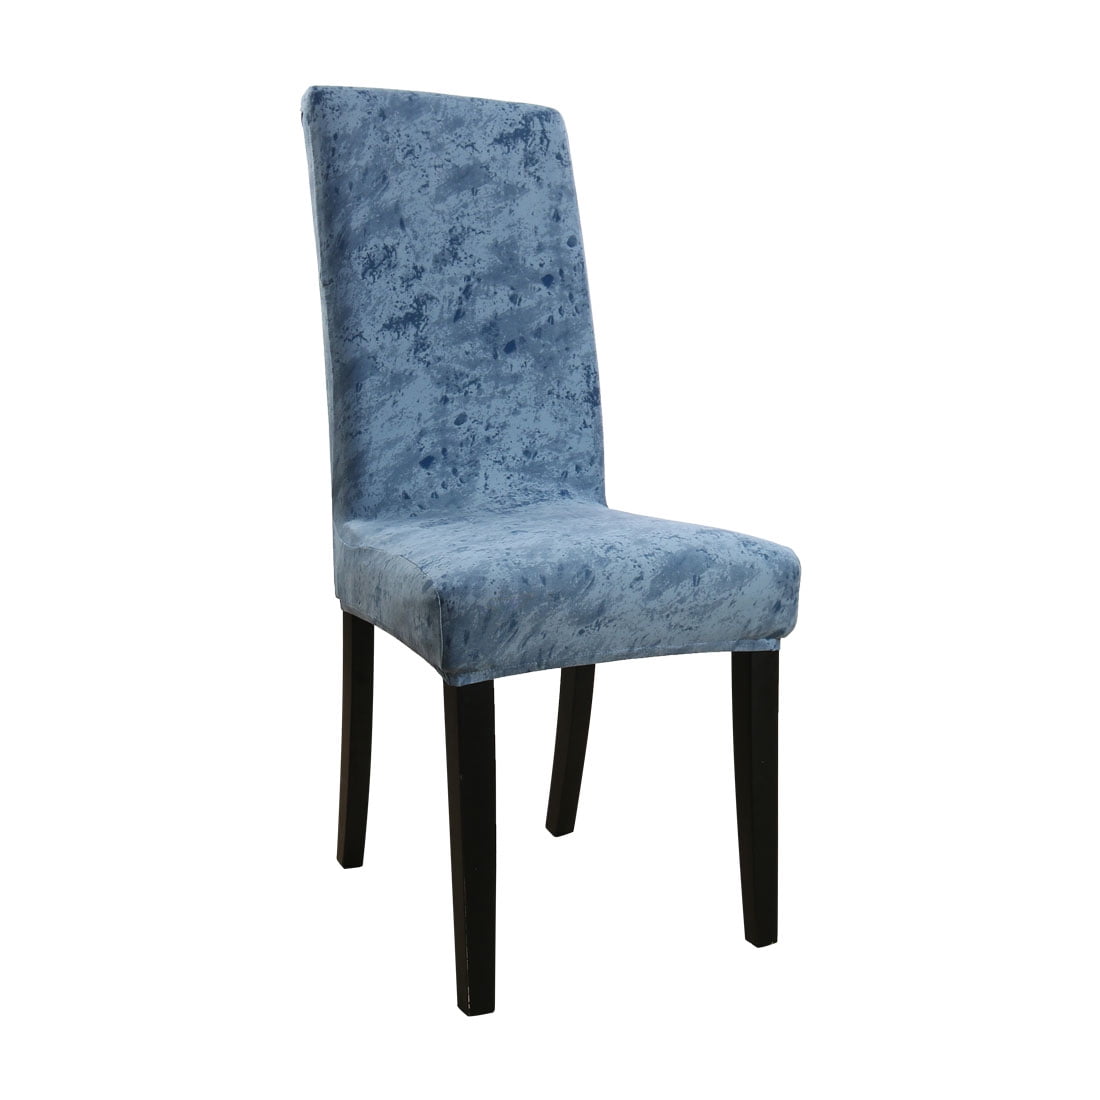 Details about   1-Stretch Dining Chair Seat Covers Slipcovers Protector Cover Wedding Home tp 